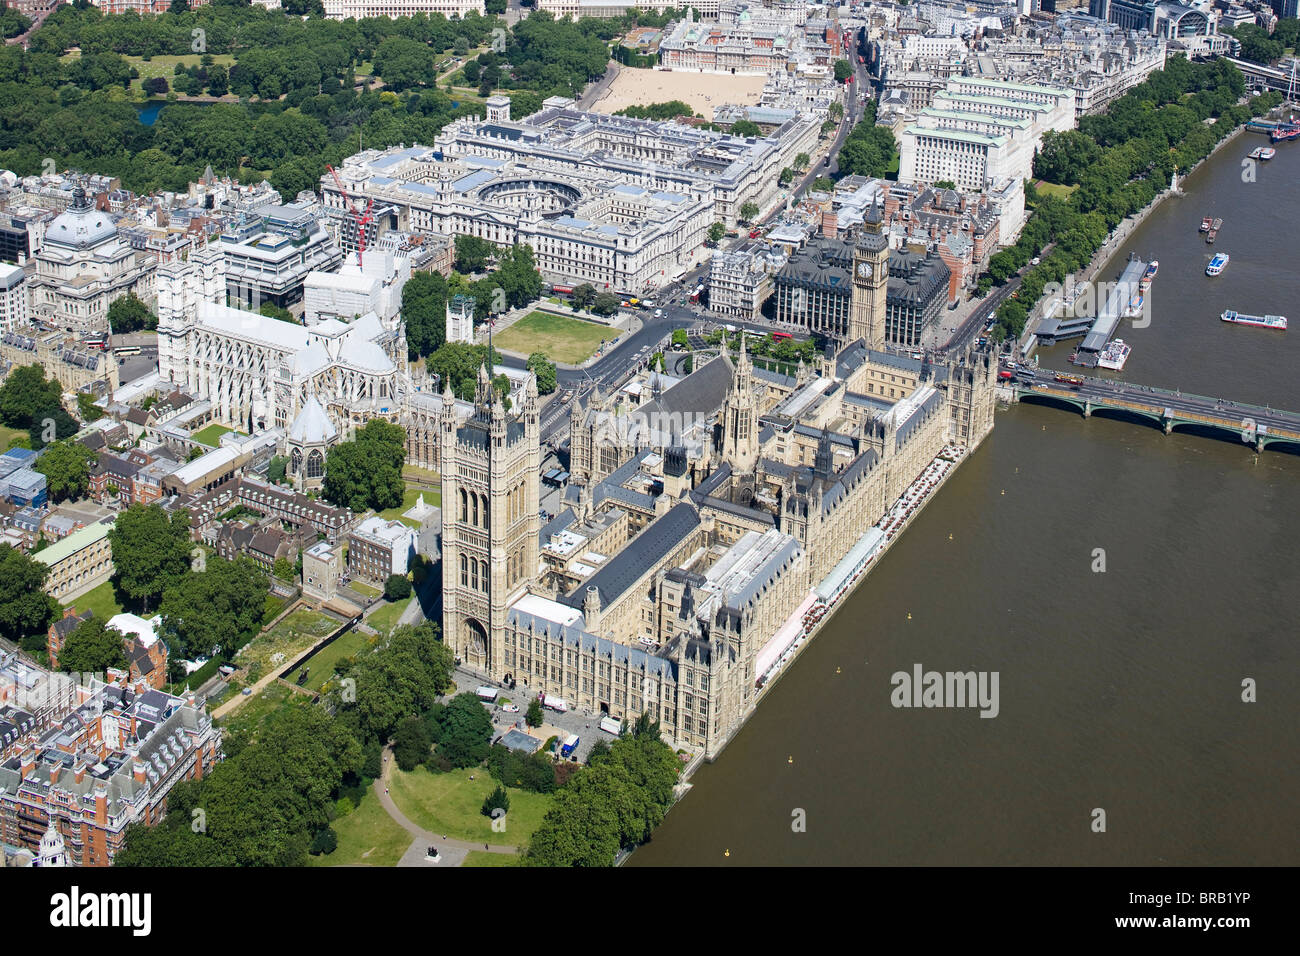 Aerial Photograph of the Houses of Parliament, London Stock Photo